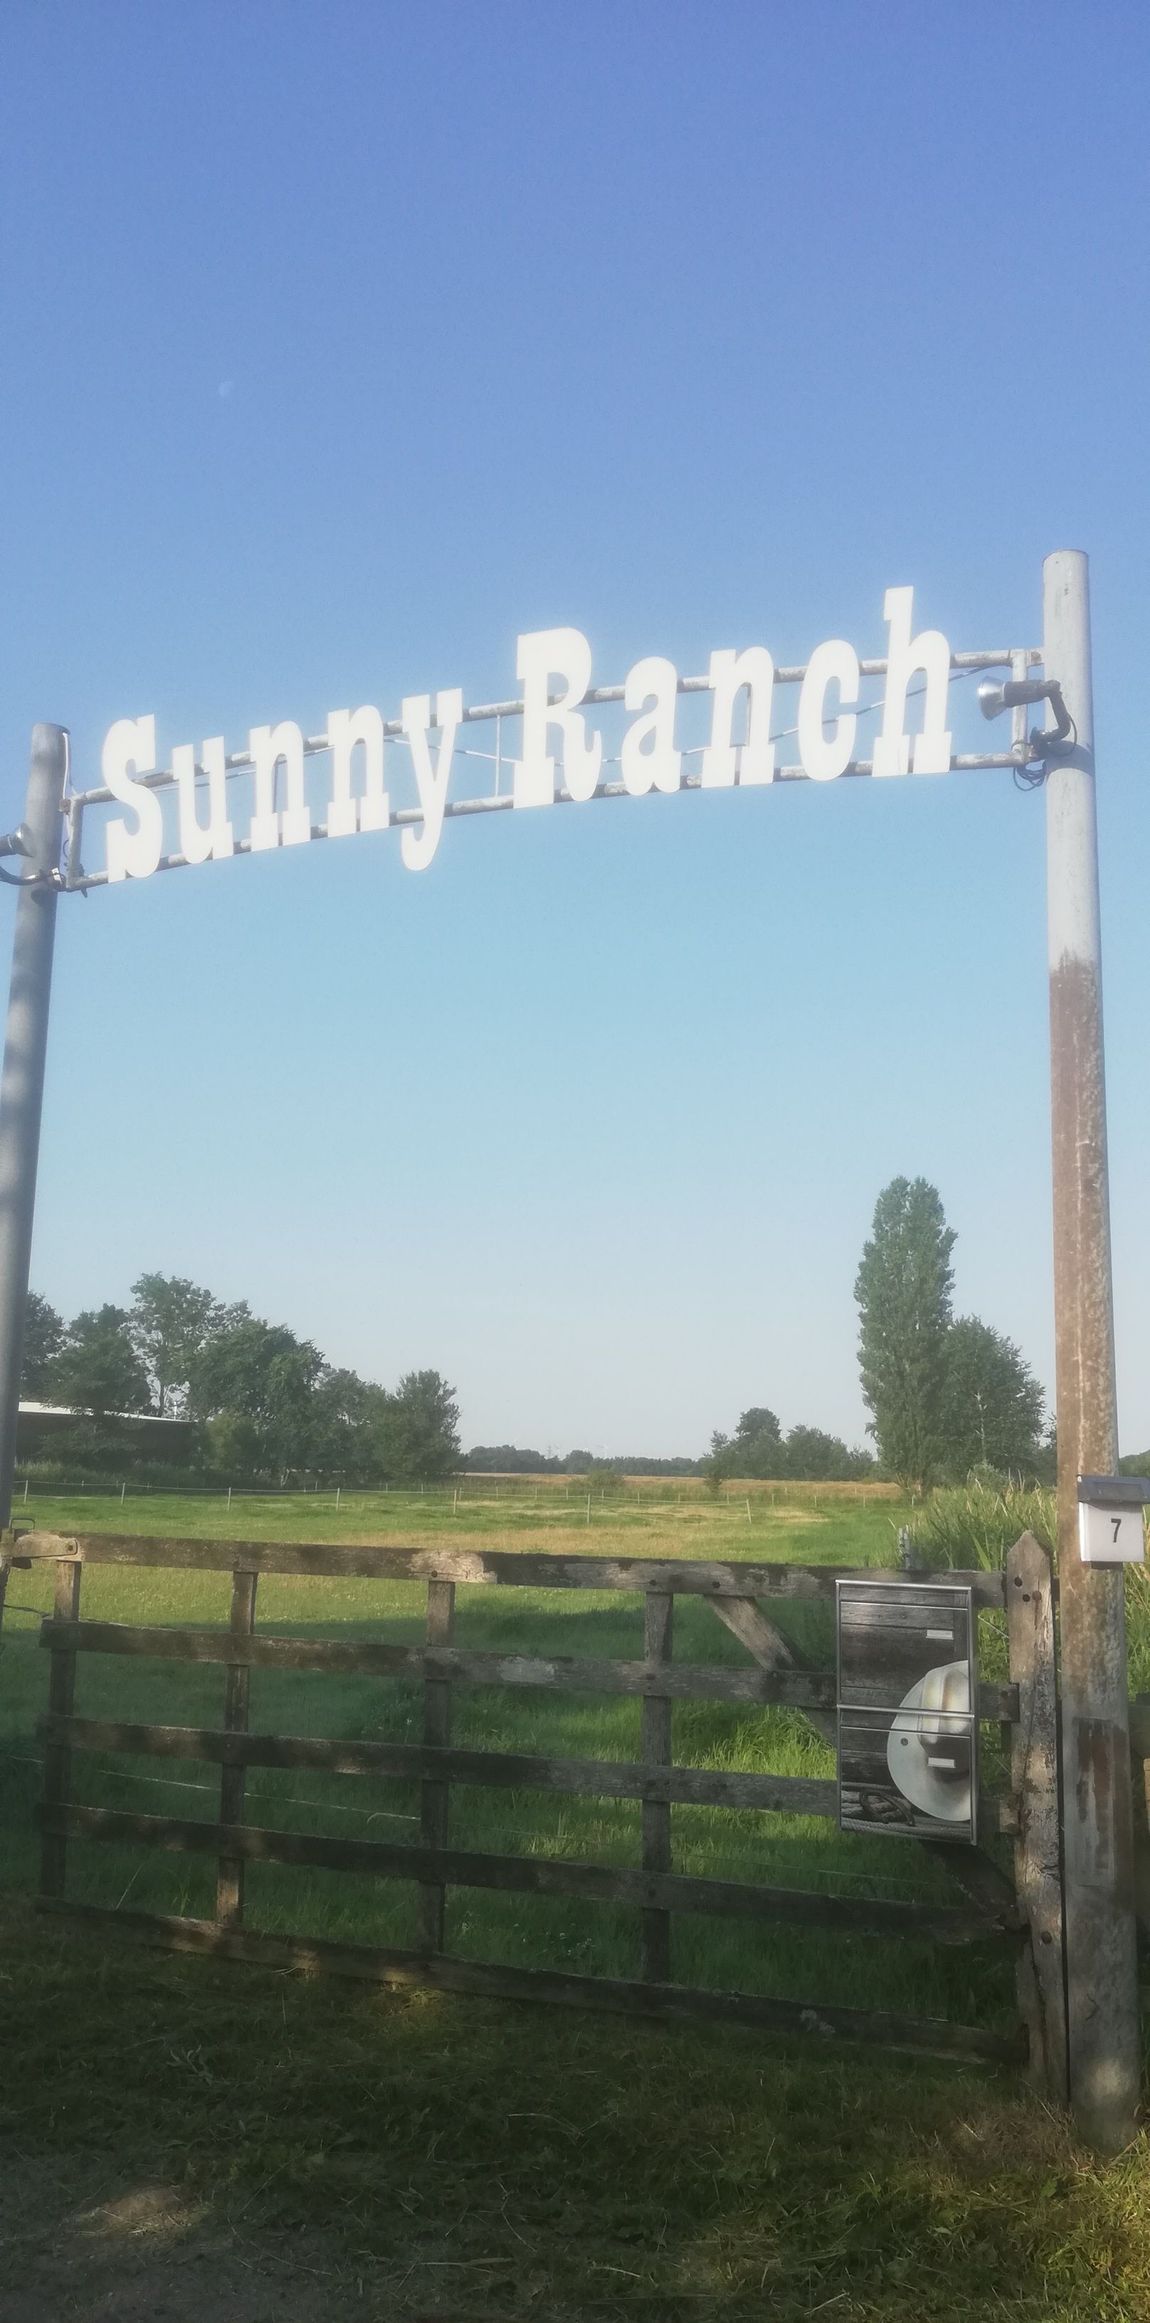 A place at the horse ranch